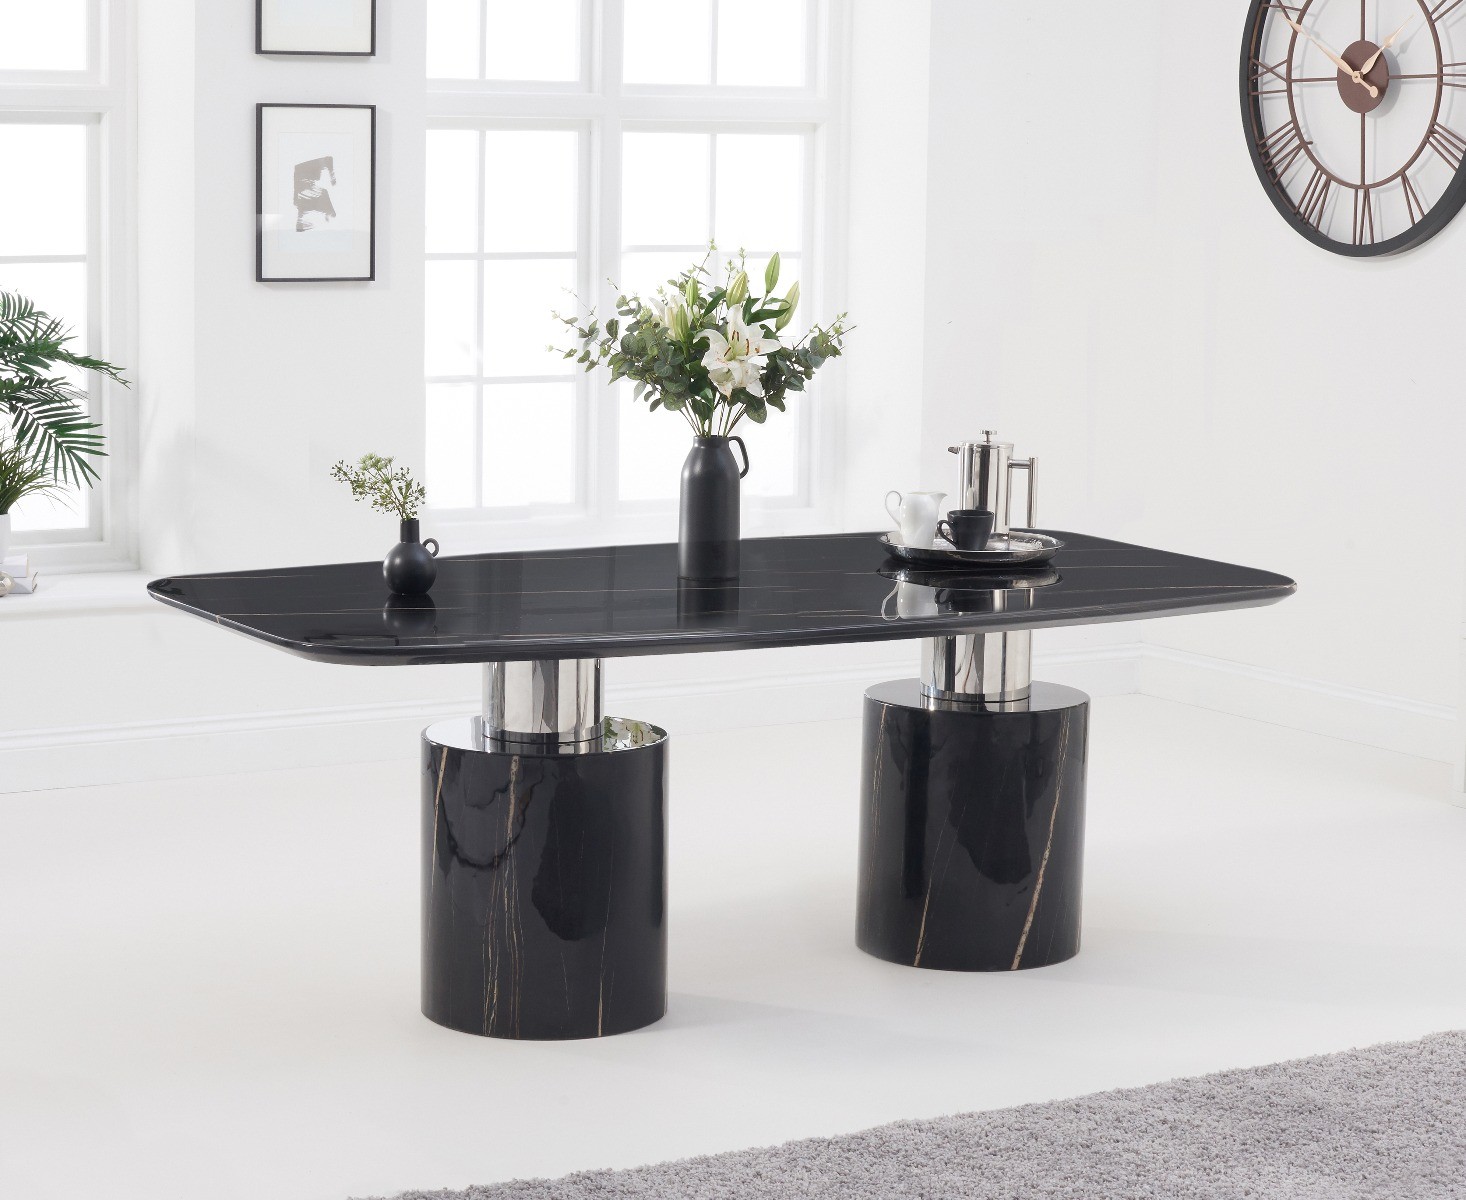 Photo 1 of Antonio 180cm black marble dining table with 4 grey aldo chairs